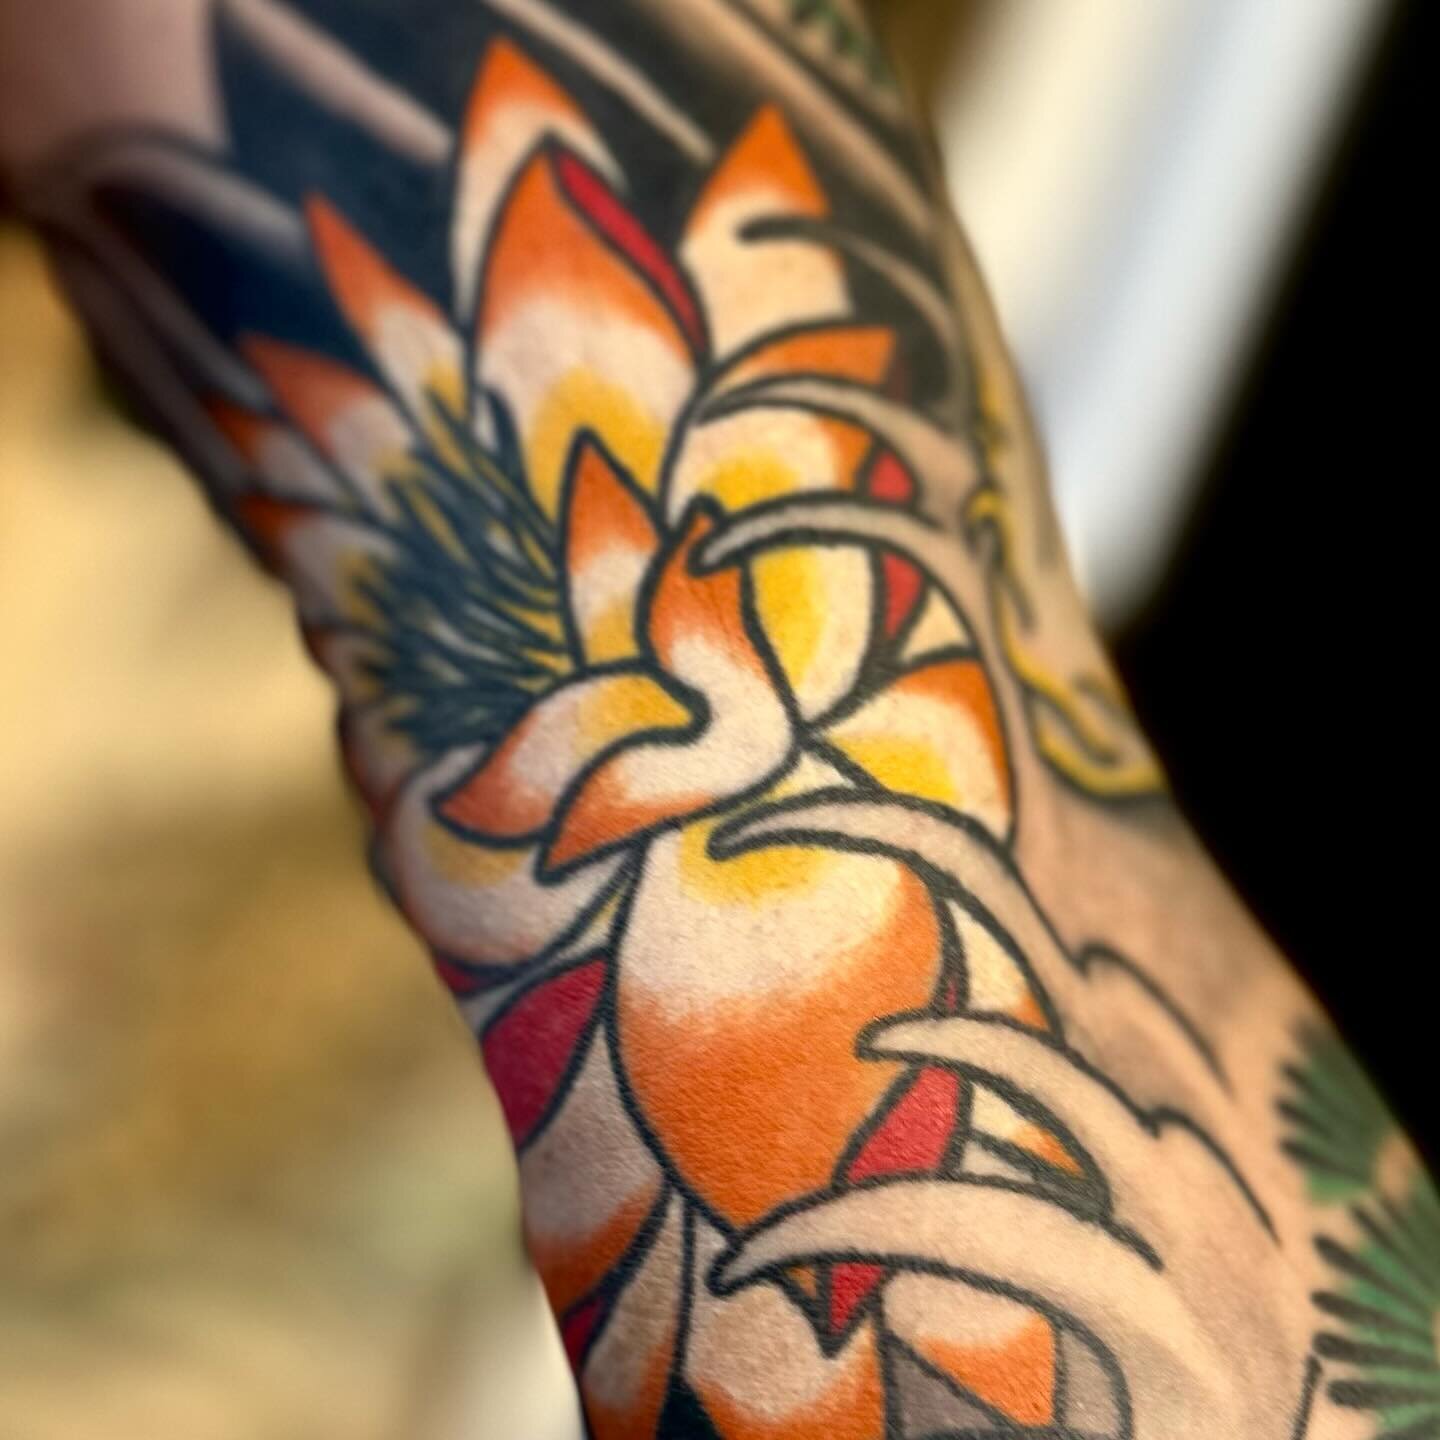 Special thanks to a very dedicated client.

1 of 2 full sleeves completed this year, 
both requiring multiple cover-ups.

##olivermunden #mundenbrothers #rocksteadytattoo #worthingtattoo #brightontattooartists #brightontattoo #sussextattoo #japaneset